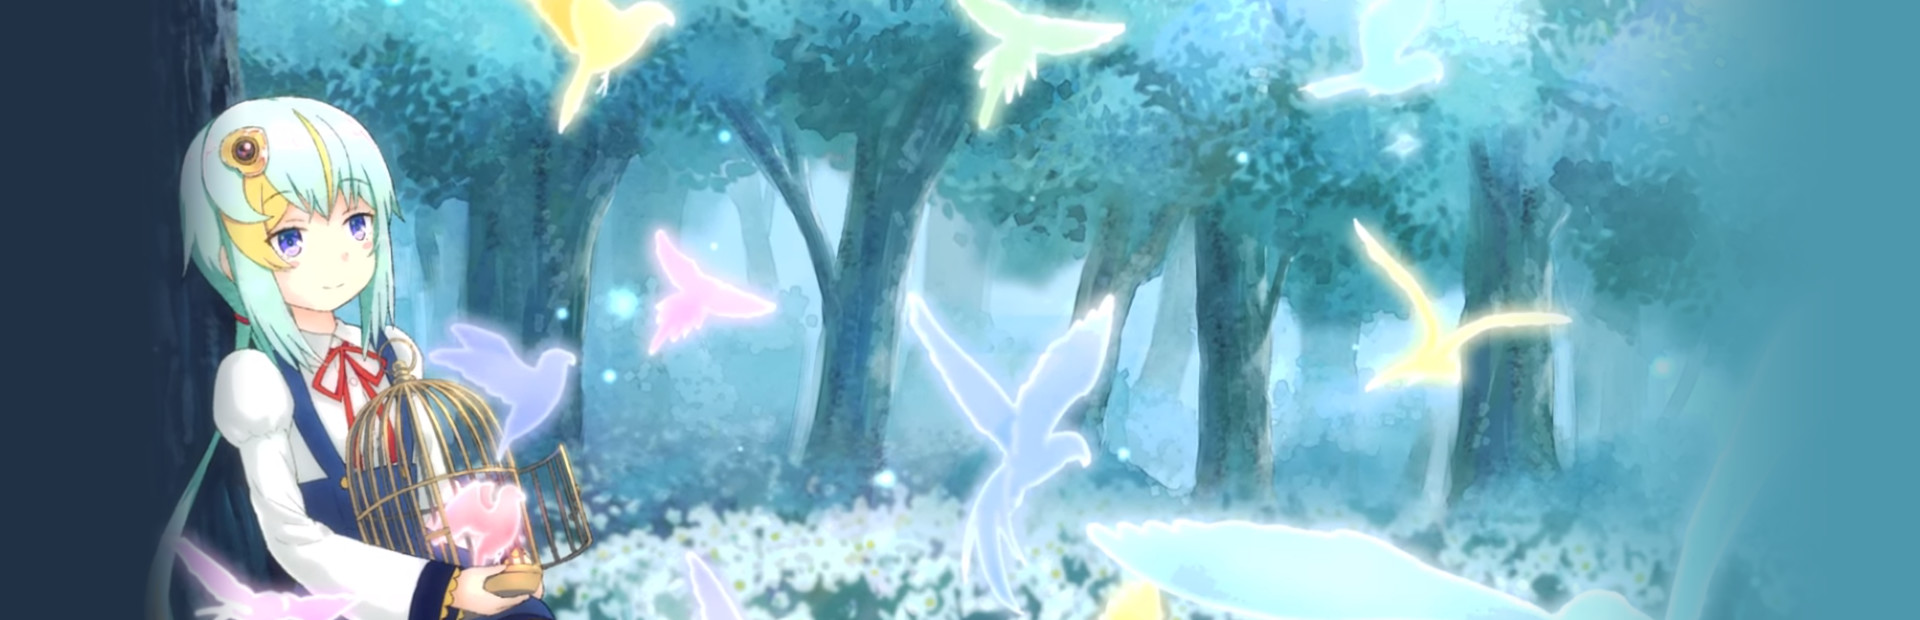 Innocent Forest: The Bird of Light cover image